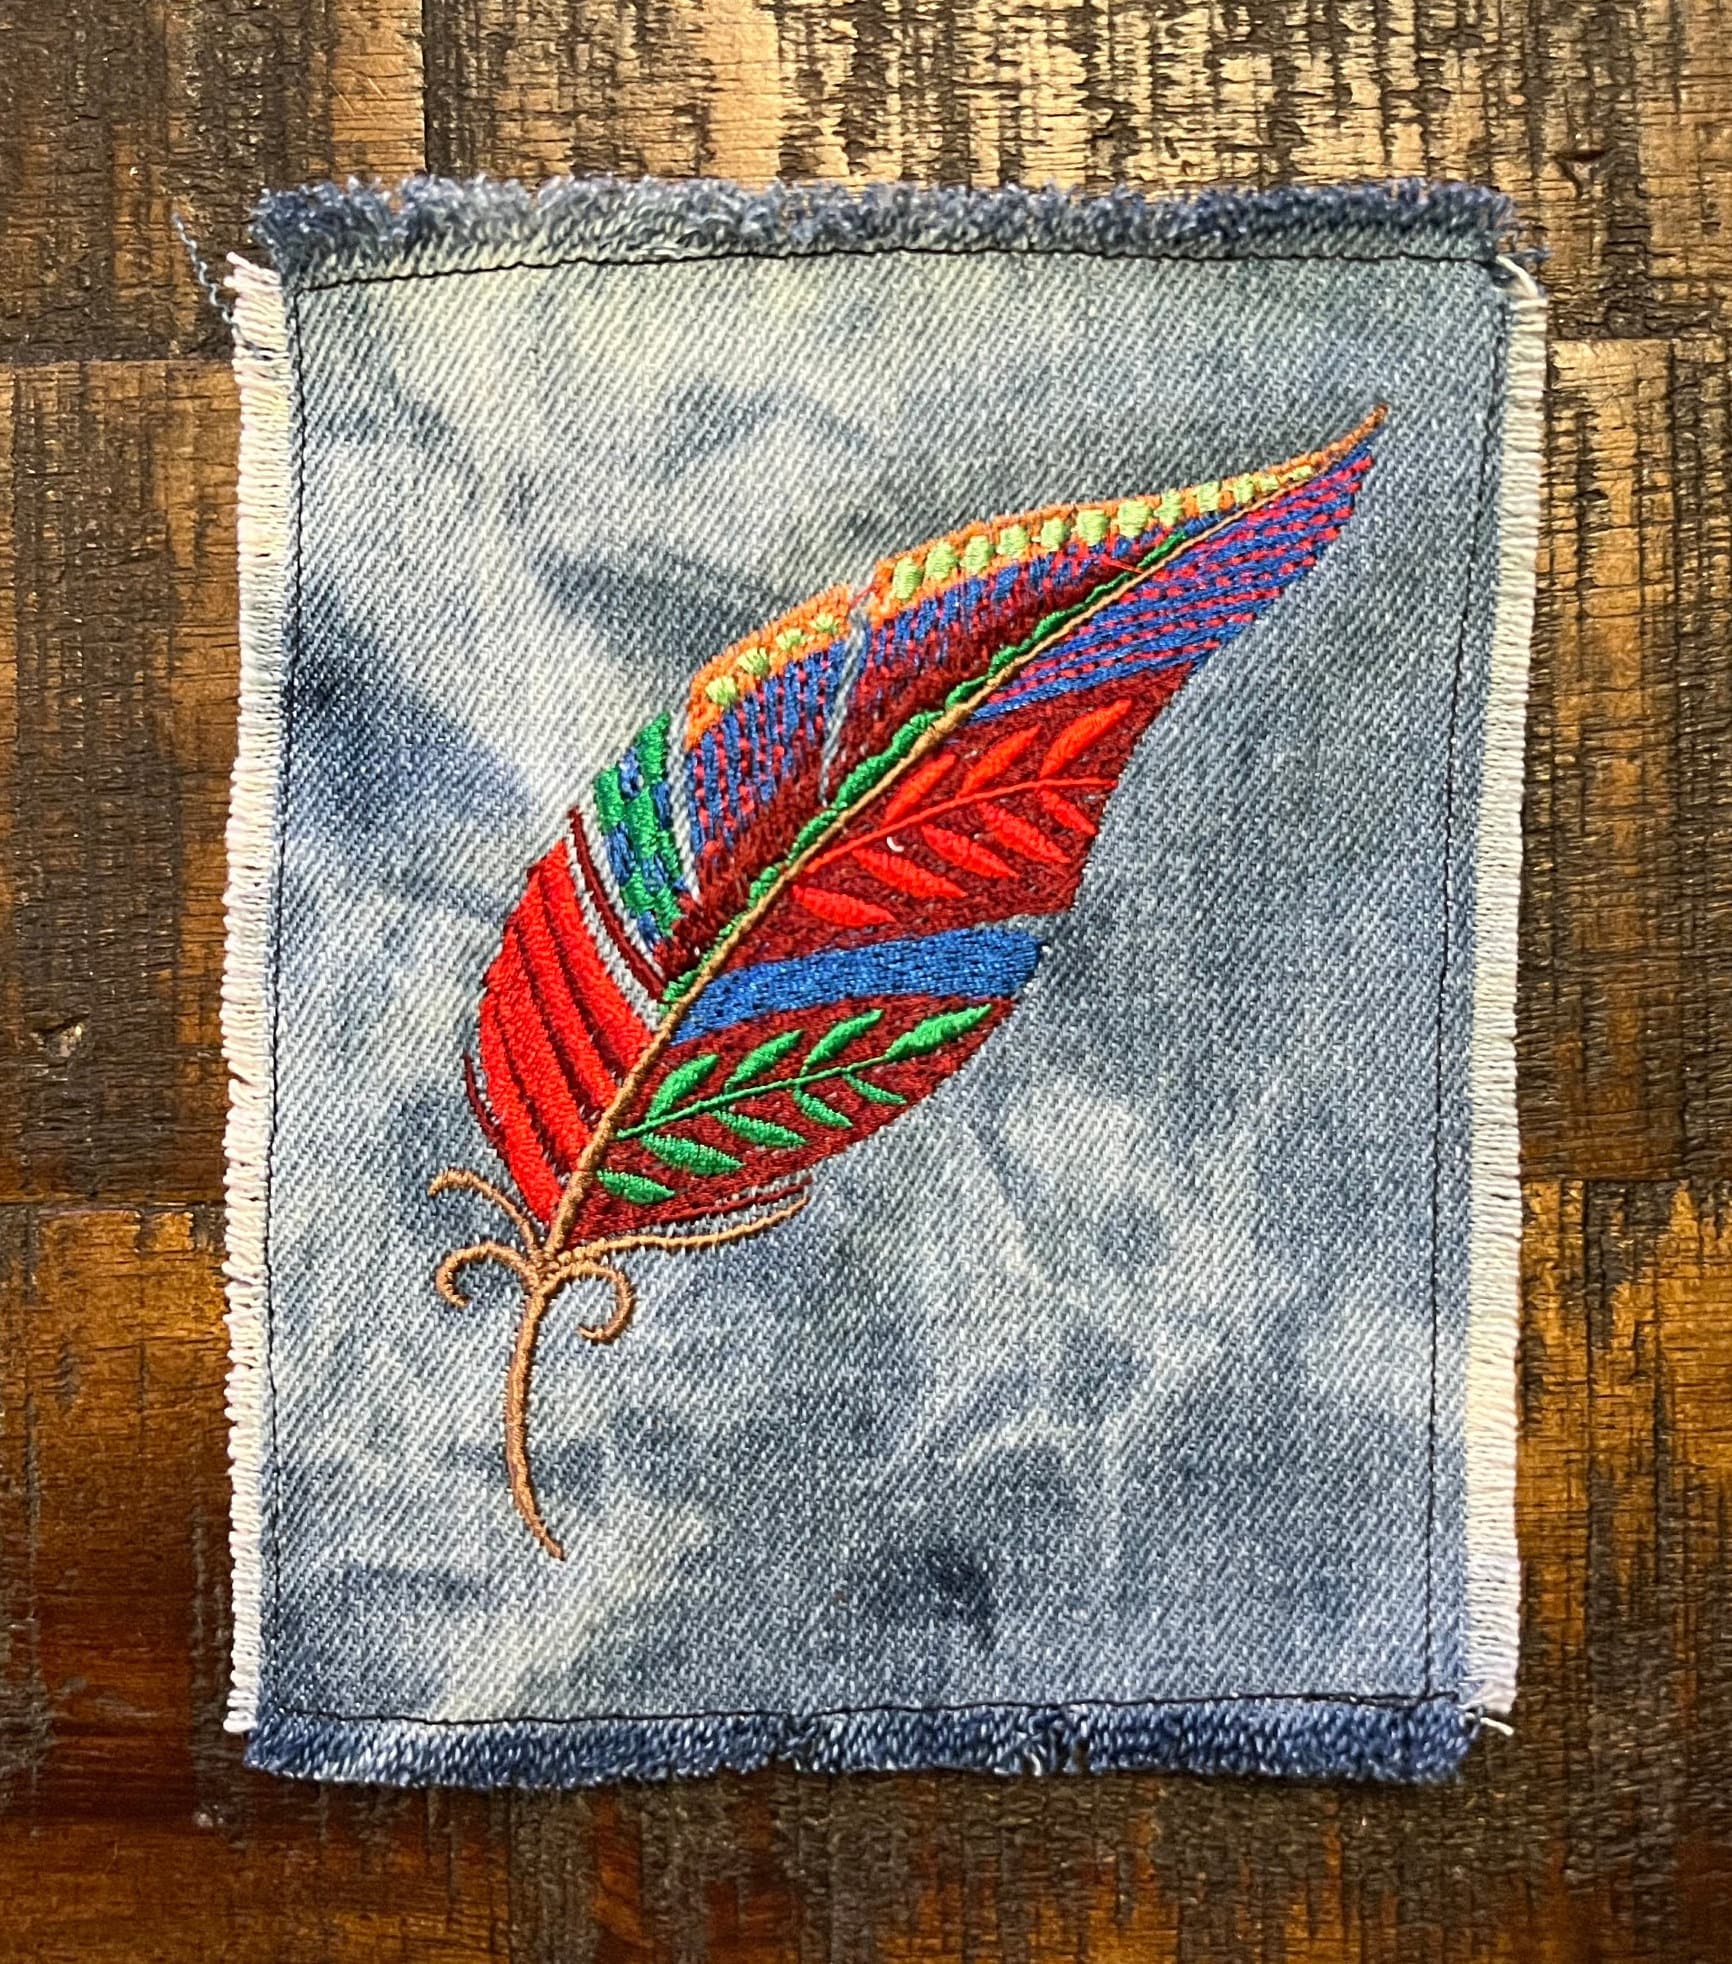 Feather Bohemian SOULE PATCH art Bleached Out blue Denim Iron On patch 5 X 5 multi color embroidered Appliques & Patches